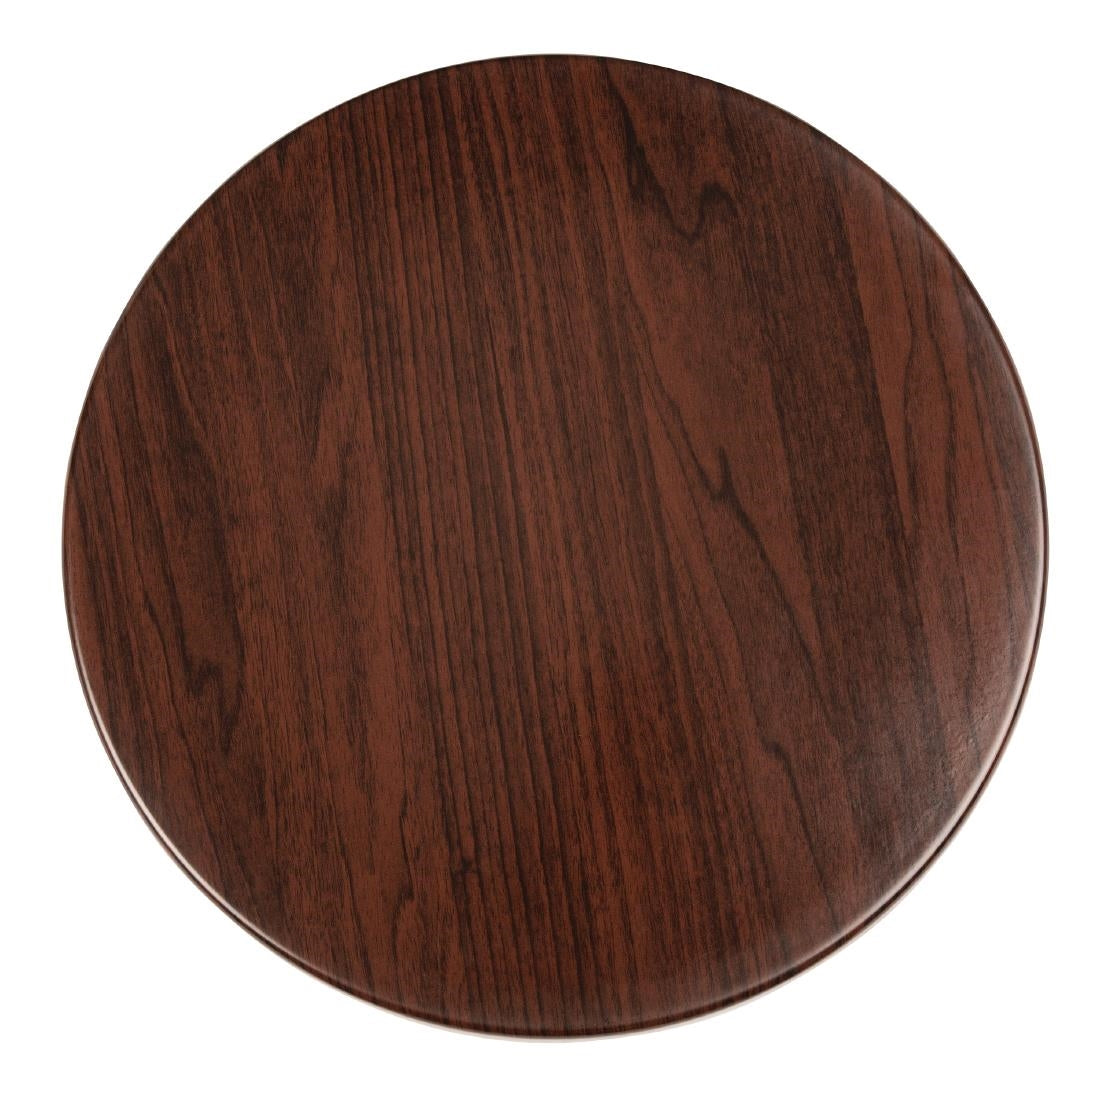 GG643 Bolero Pre-drilled Round Table Top Dark Brown 600mm JD Catering Equipment Solutions Ltd